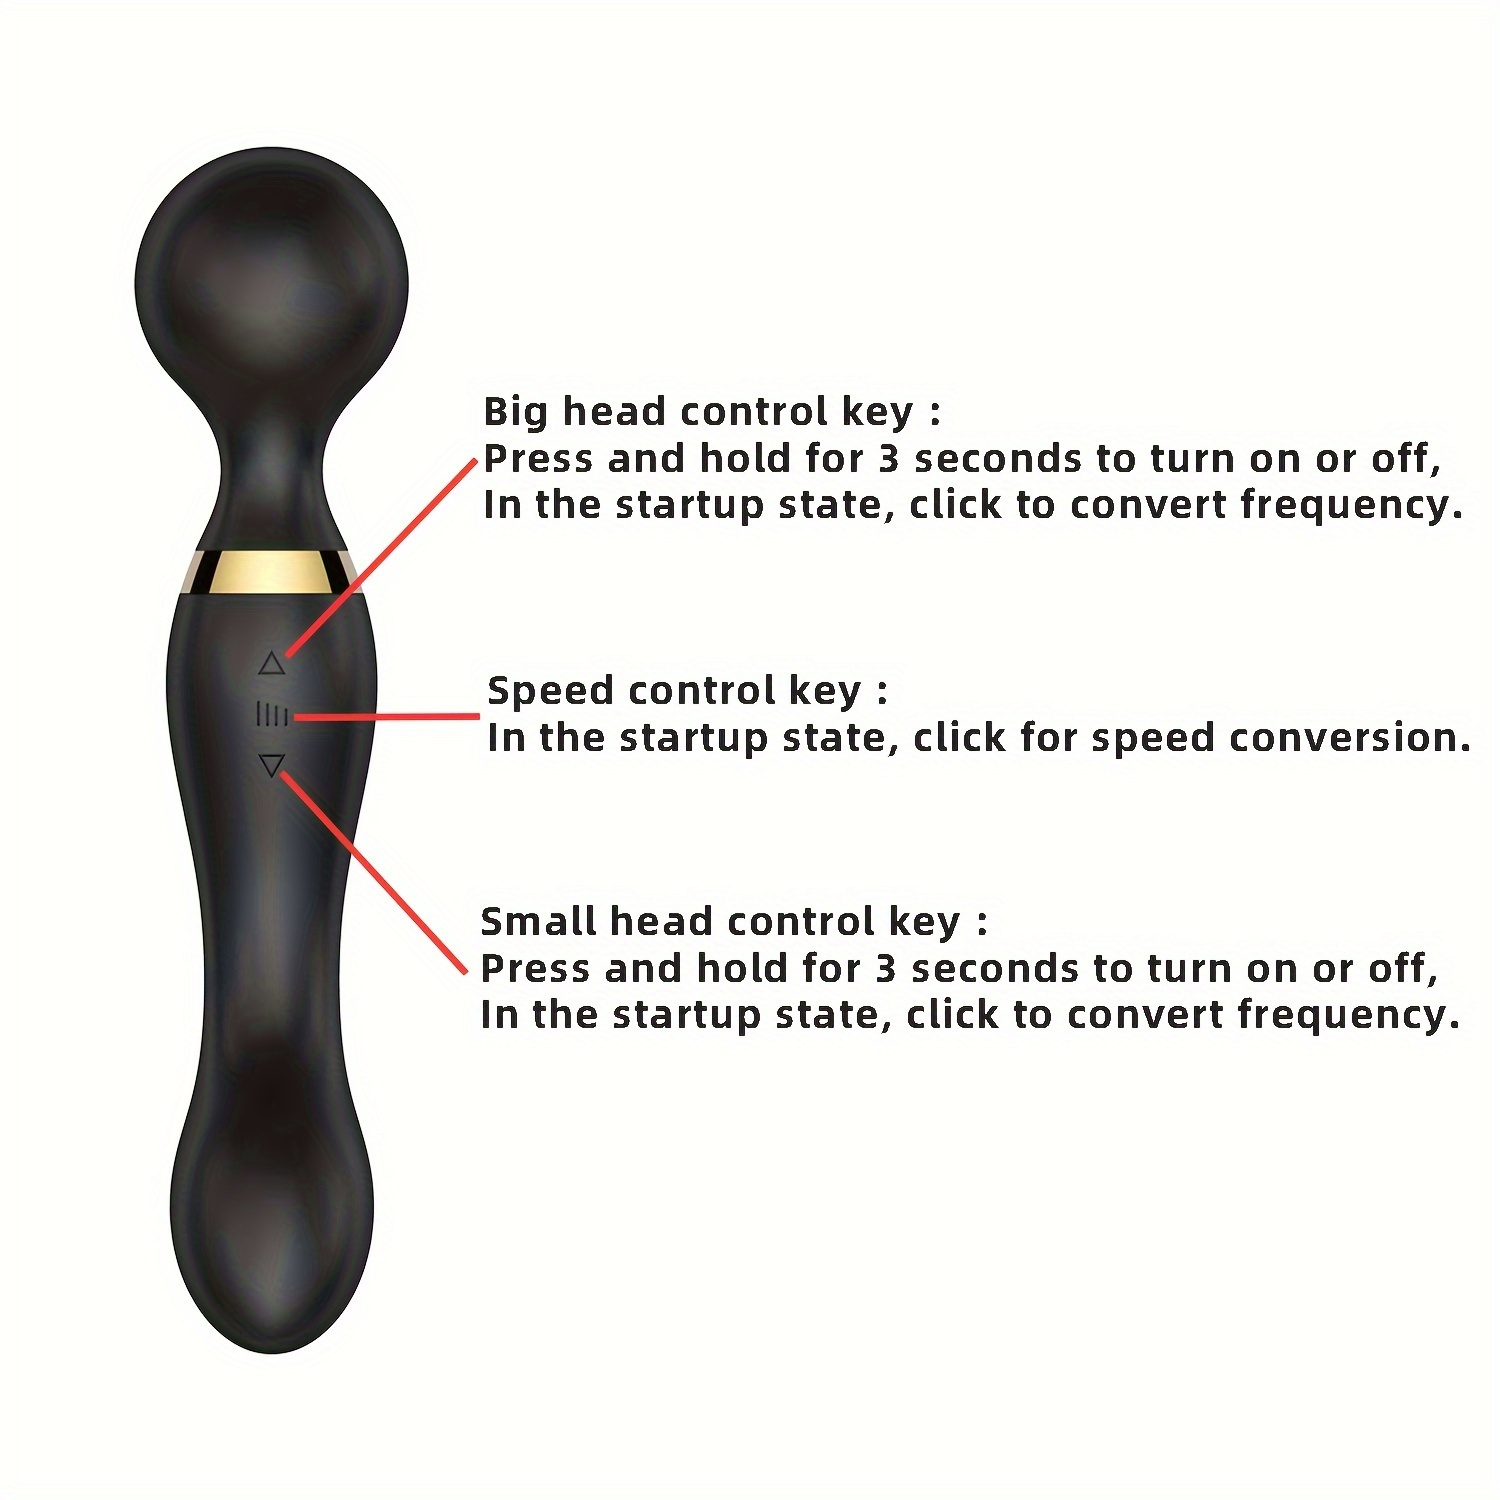 portable electric massage stick high frequency vibration massage massage gun 8 speed 20 frequency muscle relaxation handheld massager for body back neck legs waist massage easy to carry ultra compact elegant design high speed drive motor details 9